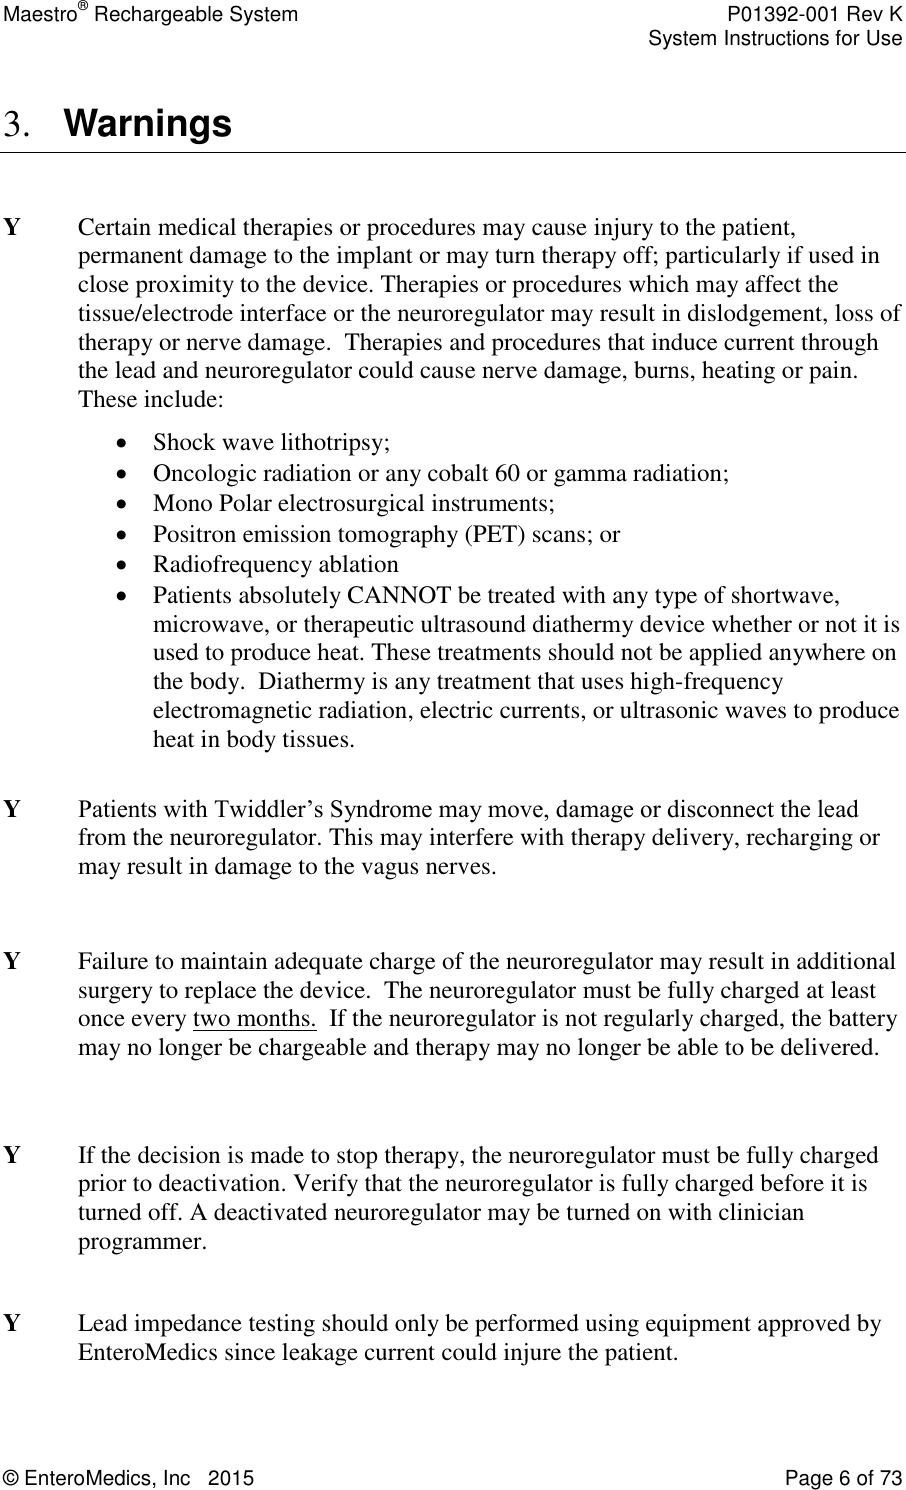 Maestro® Rechargeable System    P01392-001 Rev K     System Instructions for Use  © EnteroMedics, Inc   2015  Page 6 of 73  3. Warnings  Y   Certain medical therapies or procedures may cause injury to the patient, permanent damage to the implant or may turn therapy off; particularly if used in close proximity to the device. Therapies or procedures which may affect the tissue/electrode interface or the neuroregulator may result in dislodgement, loss of therapy or nerve damage.  Therapies and procedures that induce current through the lead and neuroregulator could cause nerve damage, burns, heating or pain. These include:  Shock wave lithotripsy;   Oncologic radiation or any cobalt 60 or gamma radiation;   Mono Polar electrosurgical instruments;   Positron emission tomography (PET) scans; or  Radiofrequency ablation  Patients absolutely CANNOT be treated with any type of shortwave, microwave, or therapeutic ultrasound diathermy device whether or not it is used to produce heat. These treatments should not be applied anywhere on the body.  Diathermy is any treatment that uses high-frequency electromagnetic radiation, electric currents, or ultrasonic waves to produce heat in body tissues.  Y   Patients with Twiddler’s Syndrome may move, damage or disconnect the lead from the neuroregulator. This may interfere with therapy delivery, recharging or may result in damage to the vagus nerves.   Y    Failure to maintain adequate charge of the neuroregulator may result in additional surgery to replace the device.  The neuroregulator must be fully charged at least once every two months.  If the neuroregulator is not regularly charged, the battery may no longer be chargeable and therapy may no longer be able to be delivered.   Y    If the decision is made to stop therapy, the neuroregulator must be fully charged prior to deactivation. Verify that the neuroregulator is fully charged before it is turned off. A deactivated neuroregulator may be turned on with clinician programmer.   Y  Lead impedance testing should only be performed using equipment approved by EnteroMedics since leakage current could injure the patient.  